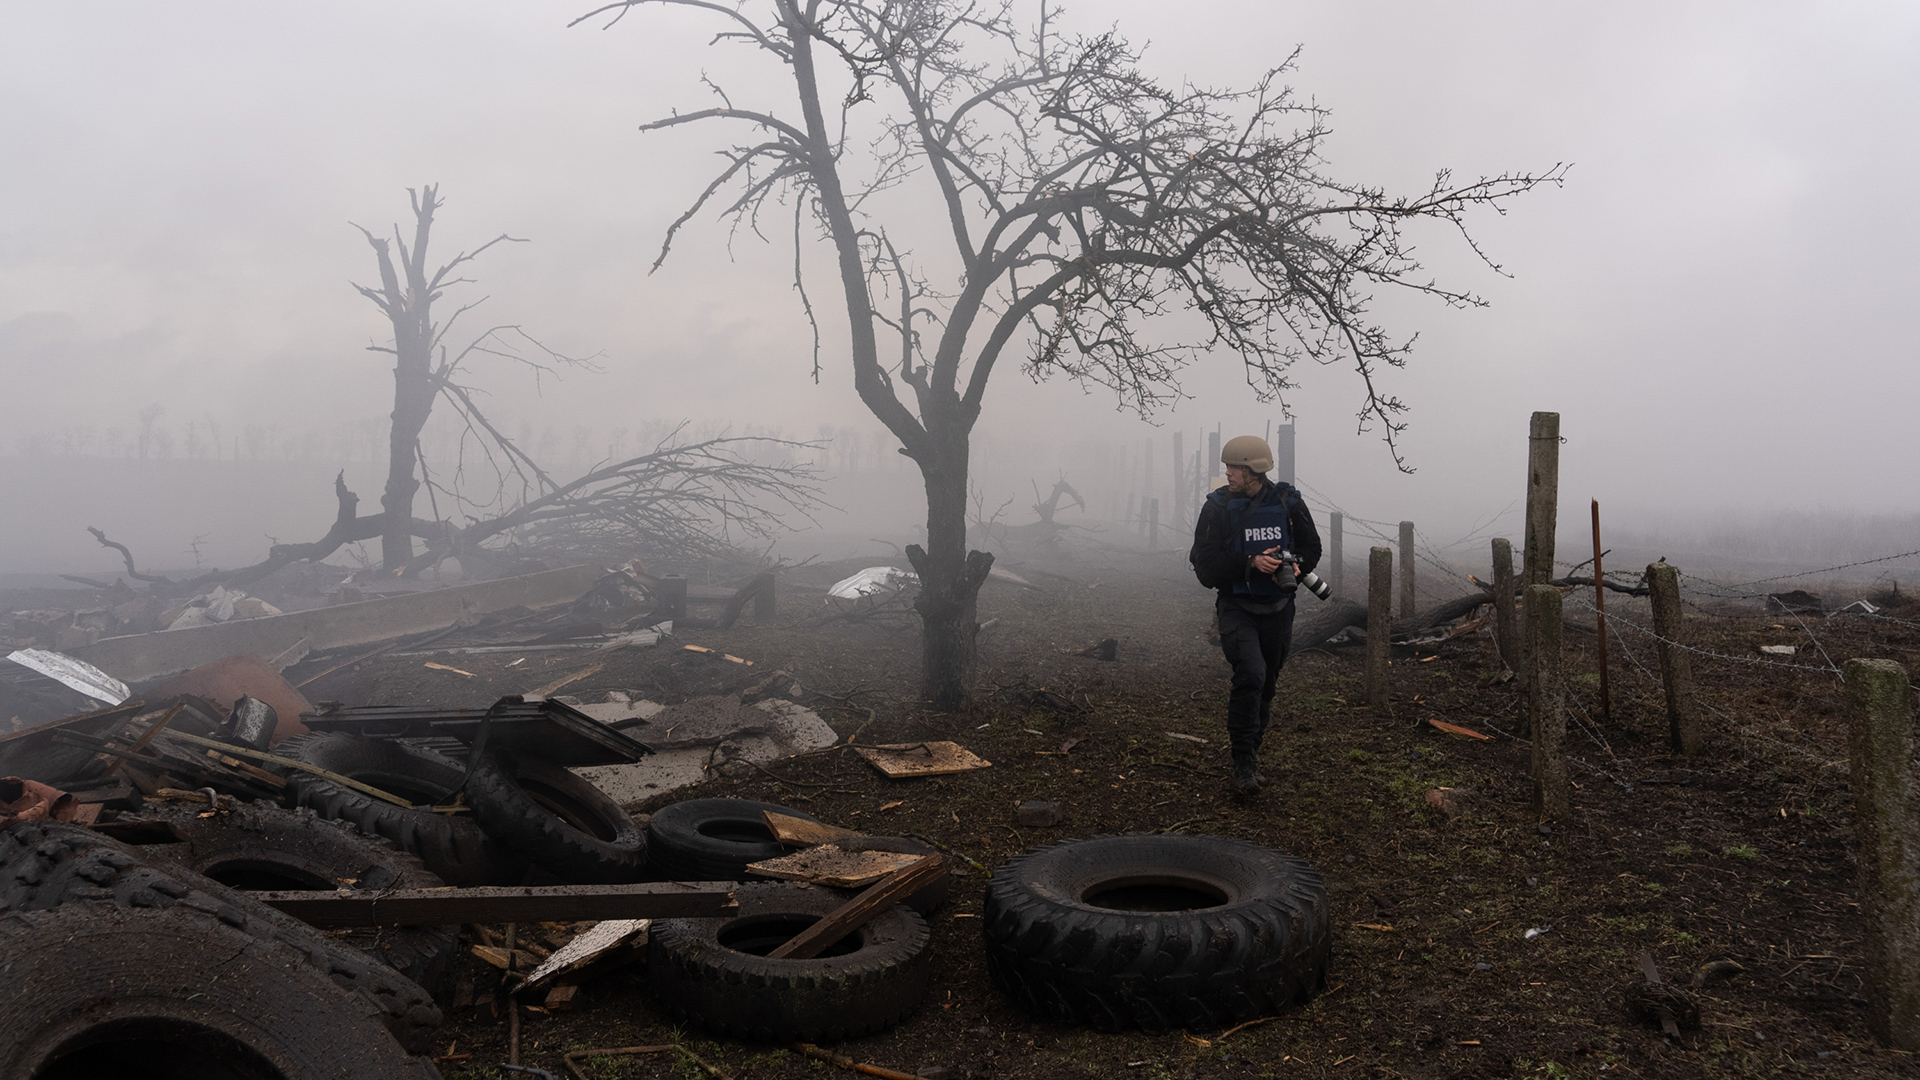 A journalist wearing a helmet and a jacket labeled 'PRESS' walking through a fog-covered, devastated landscape filled with discarded tires, broken wood, and debris. A bare, prominent tree stands amidst the mist, and remnants of a fence can be seen in the background.